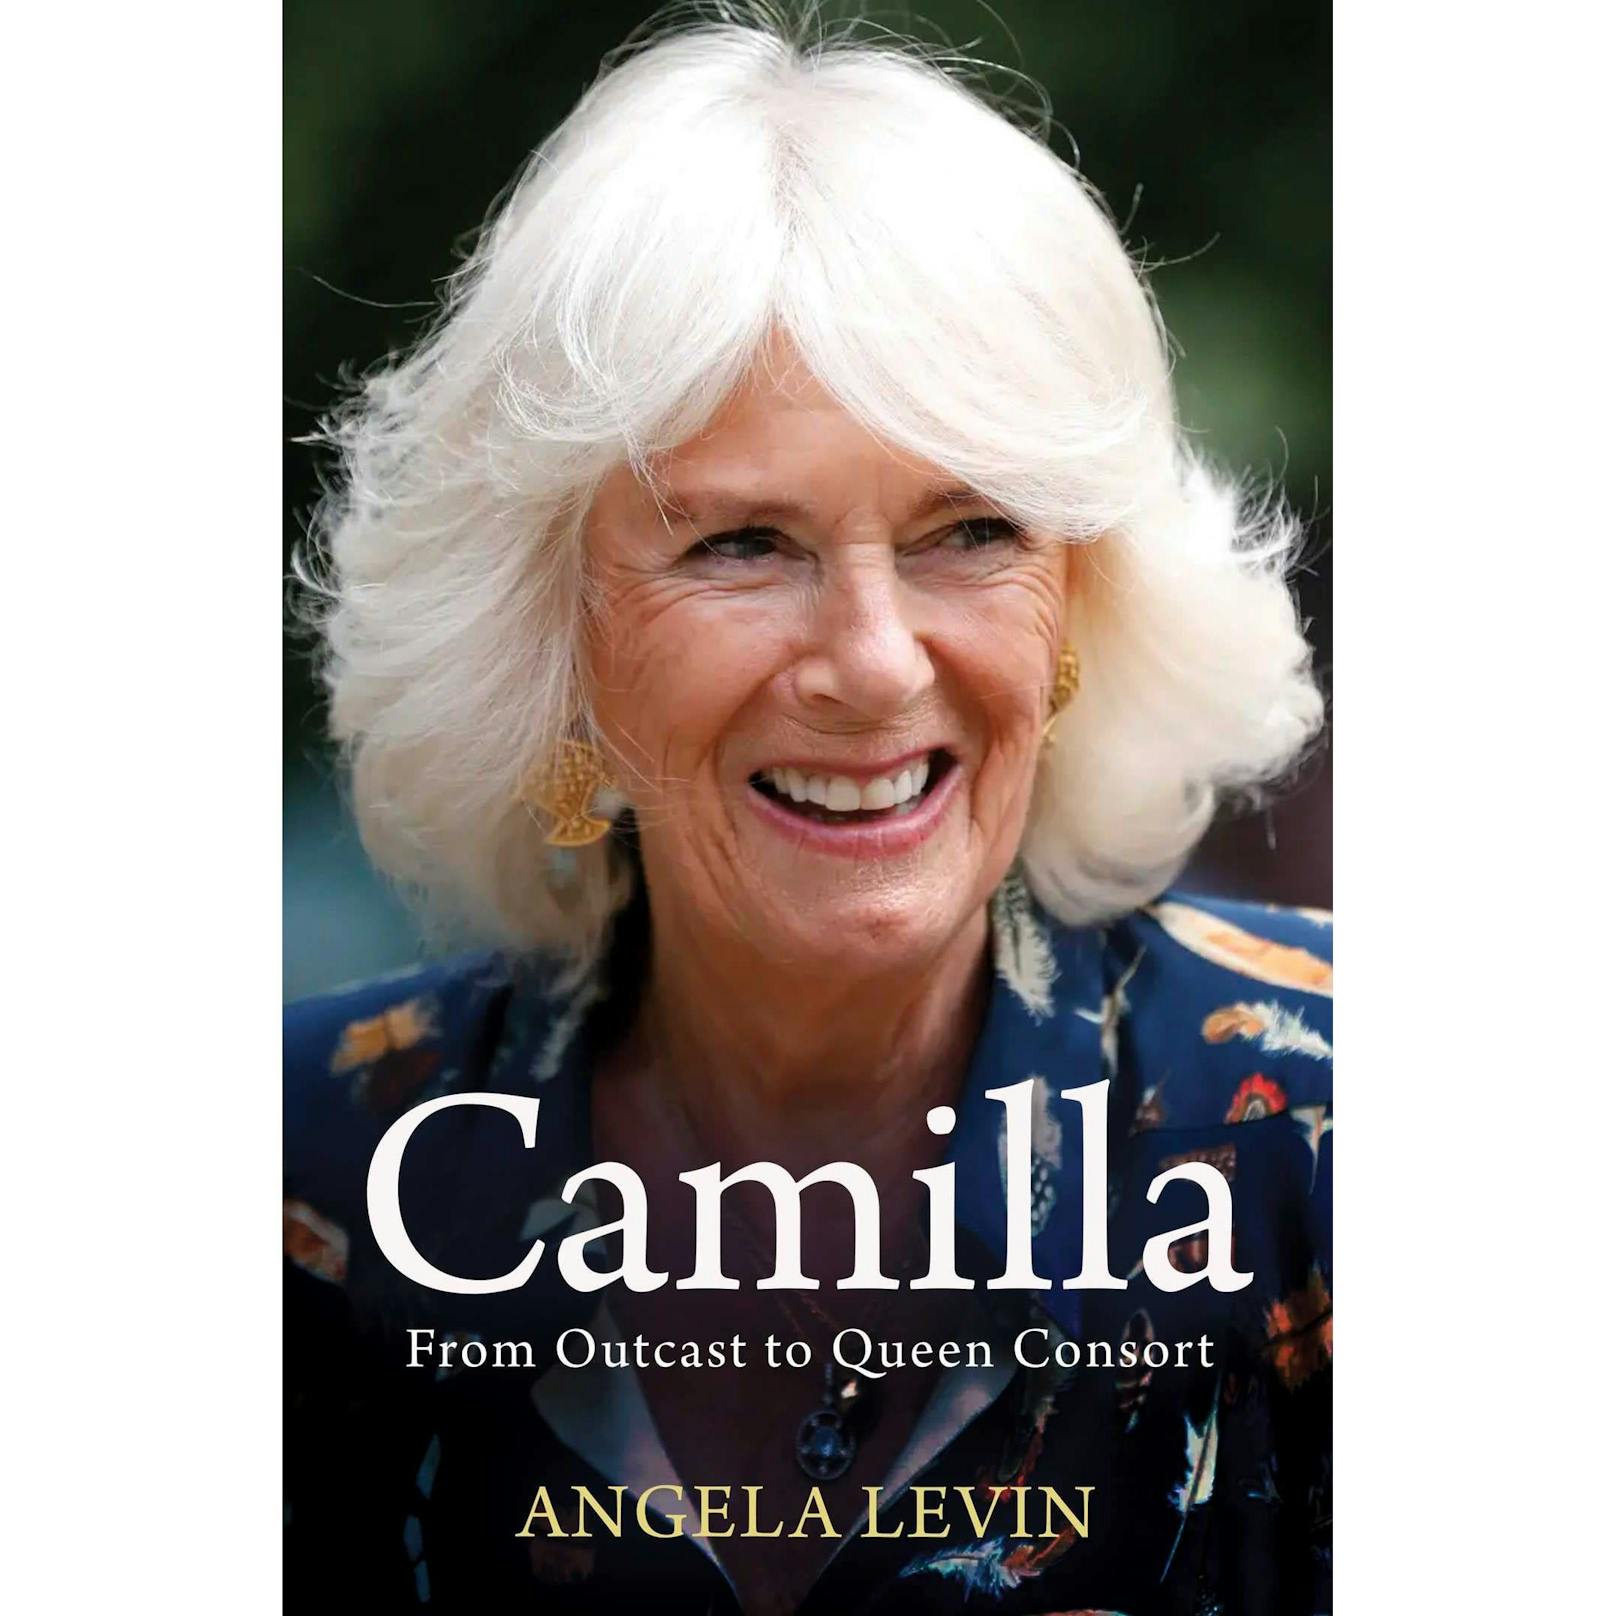 "Camilla, from Outcast to Queen Consort"